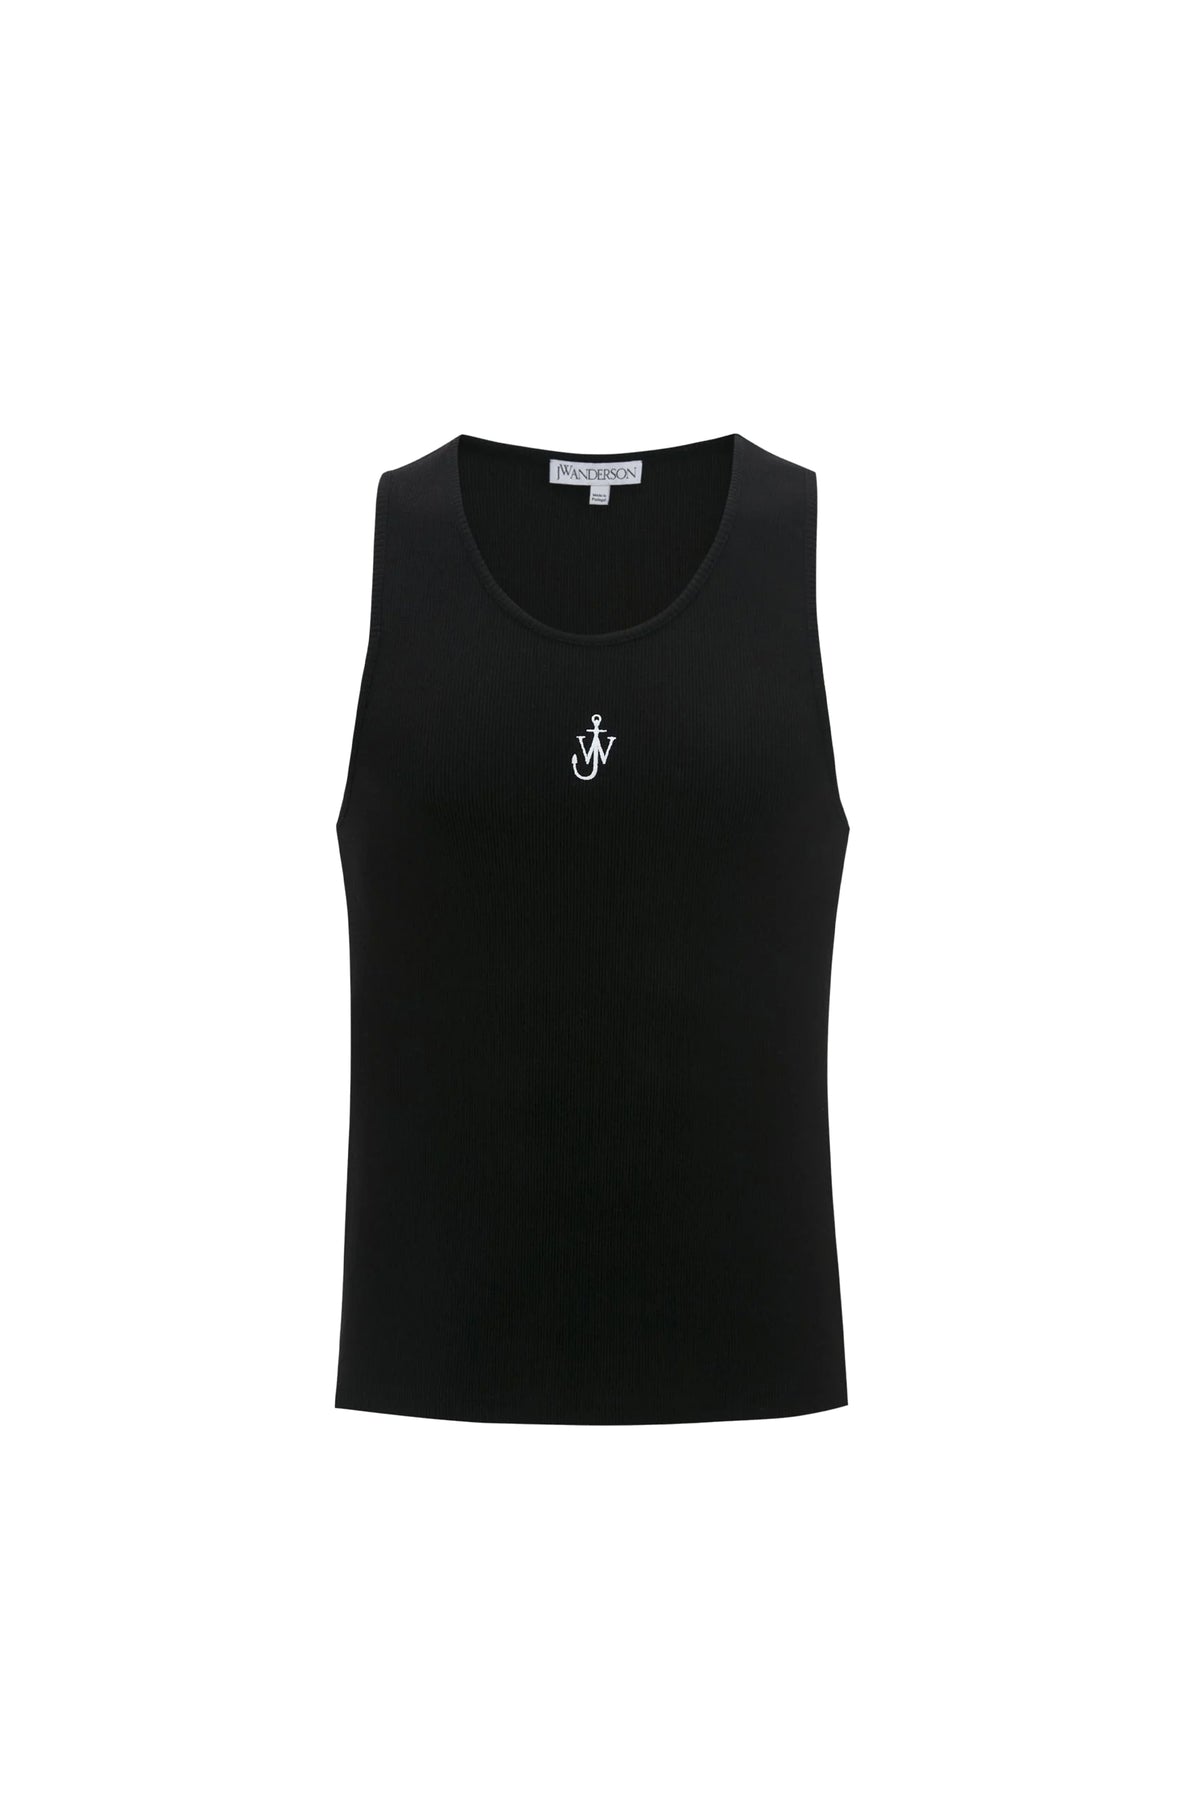 ANCHOR EMBROIDERY TANK TOP / BLK